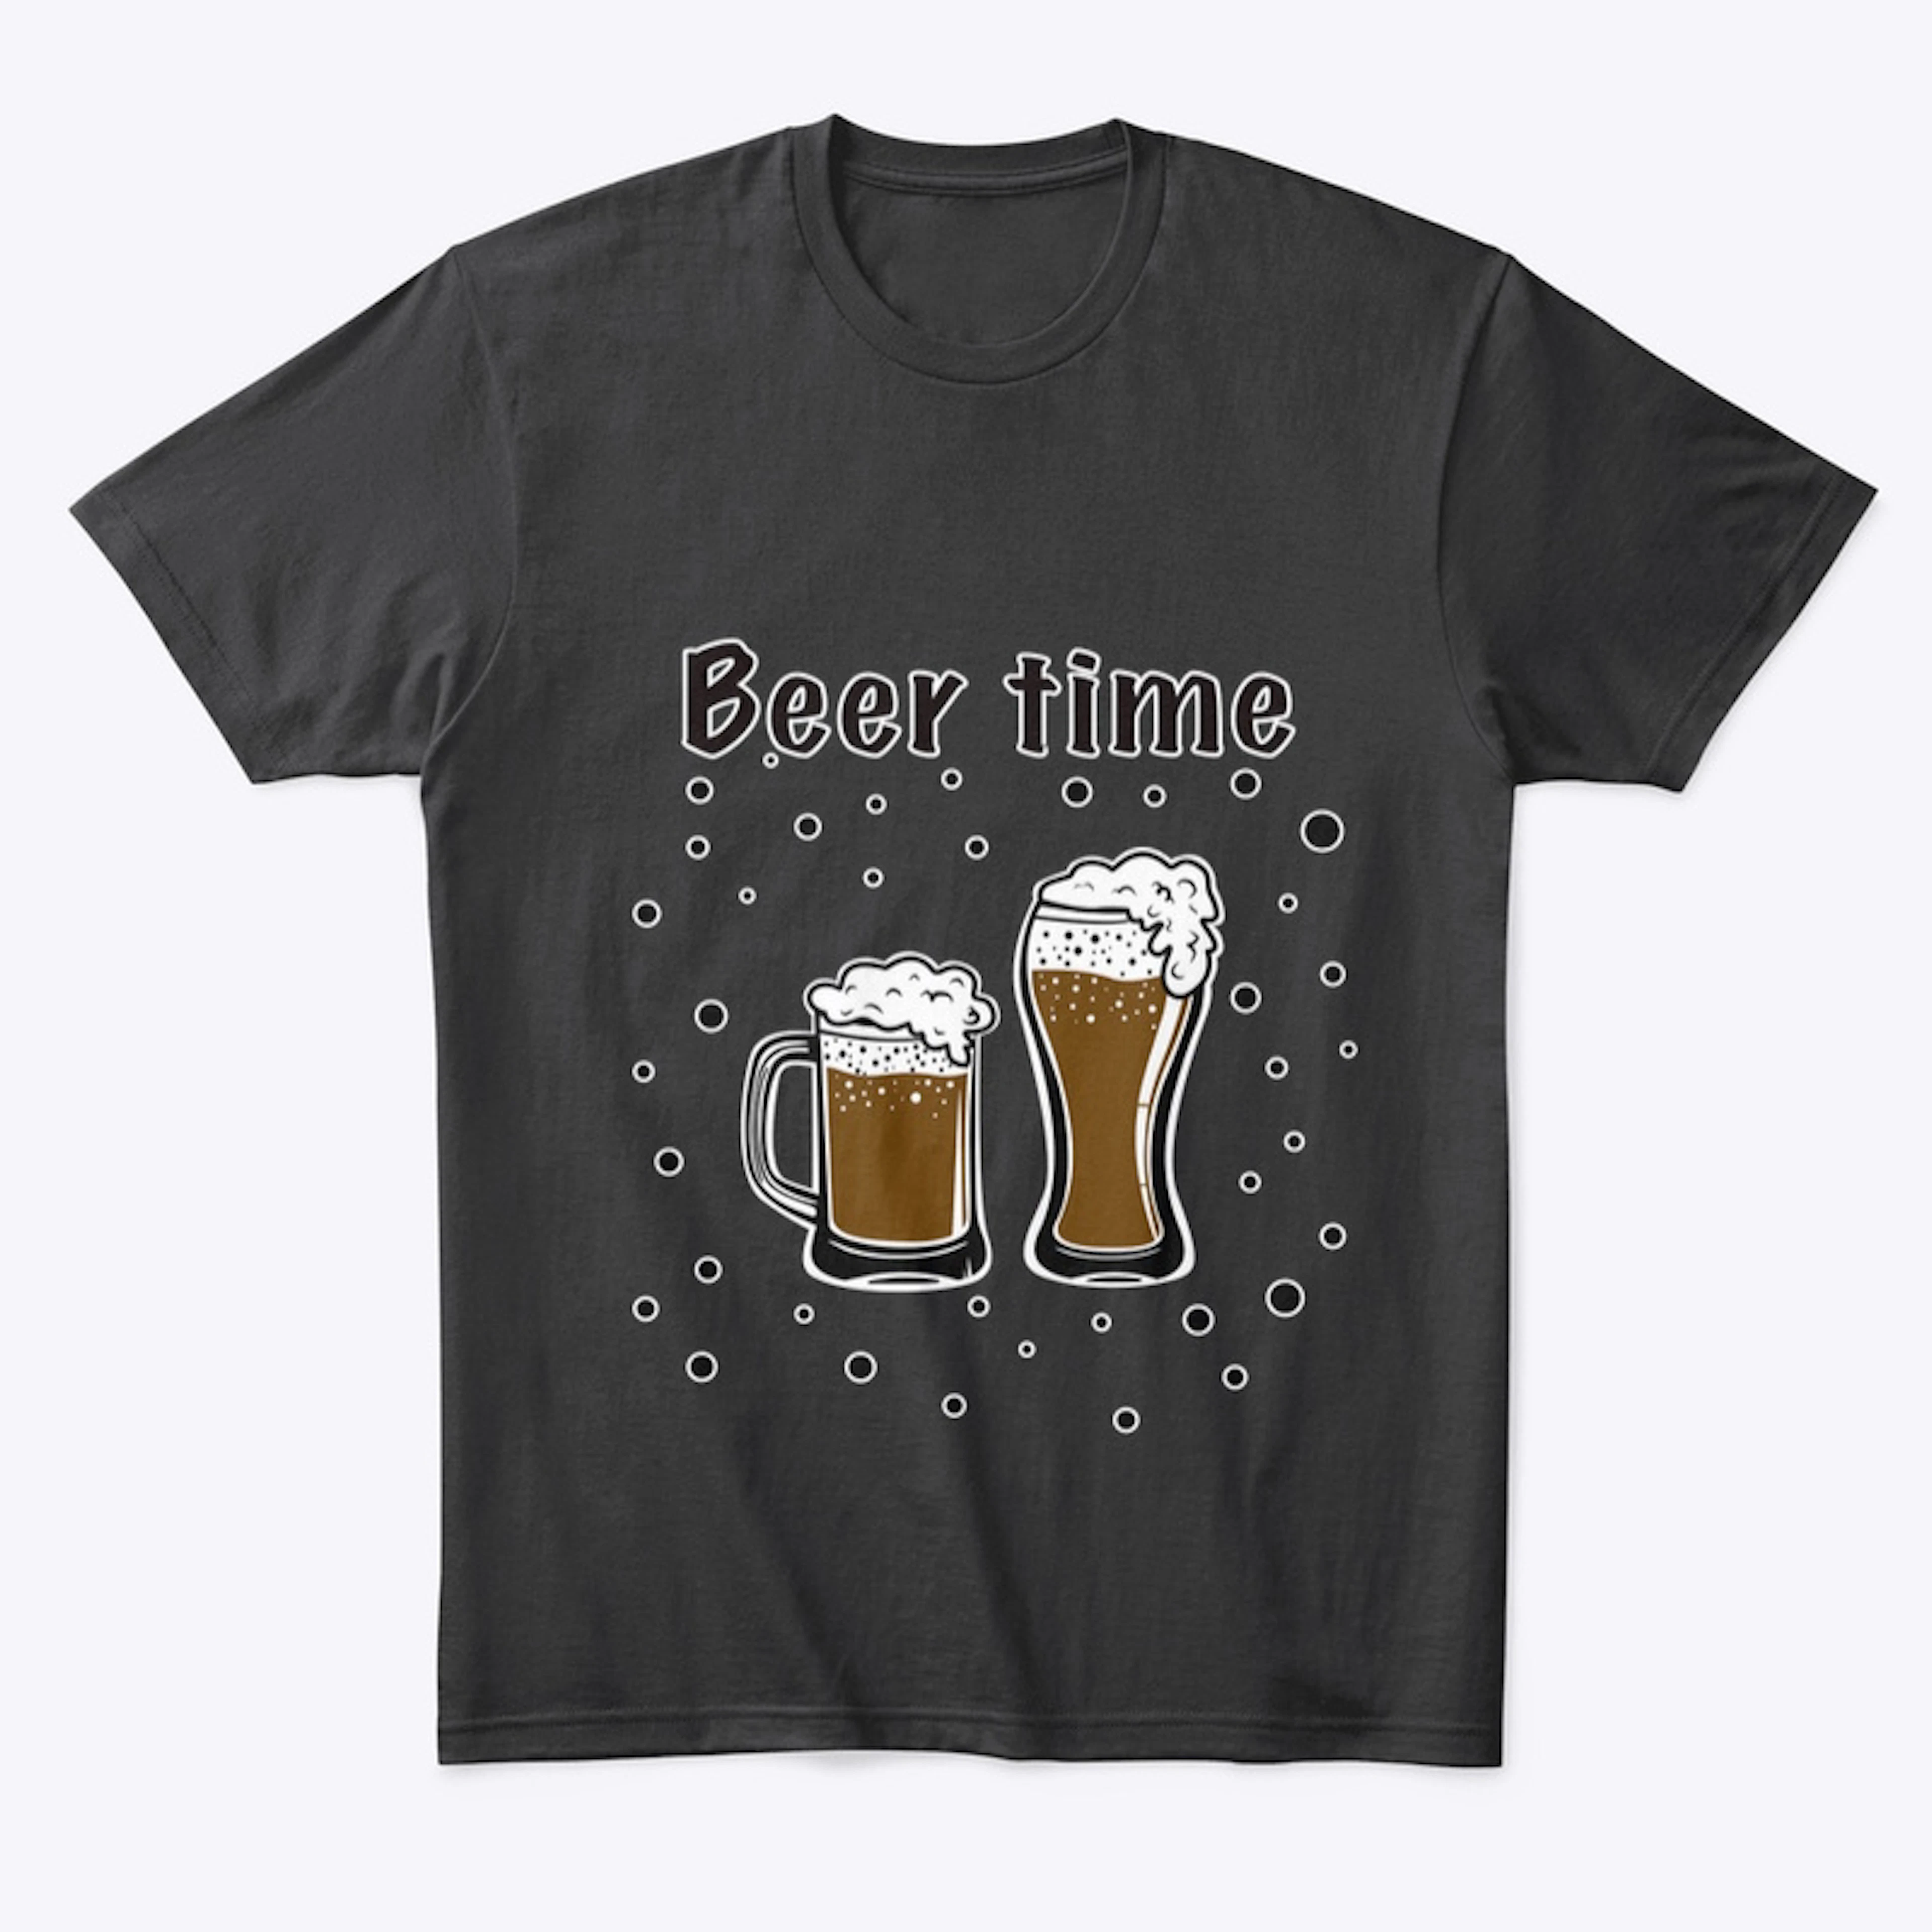 Unisex T-Shirt “Beer time”